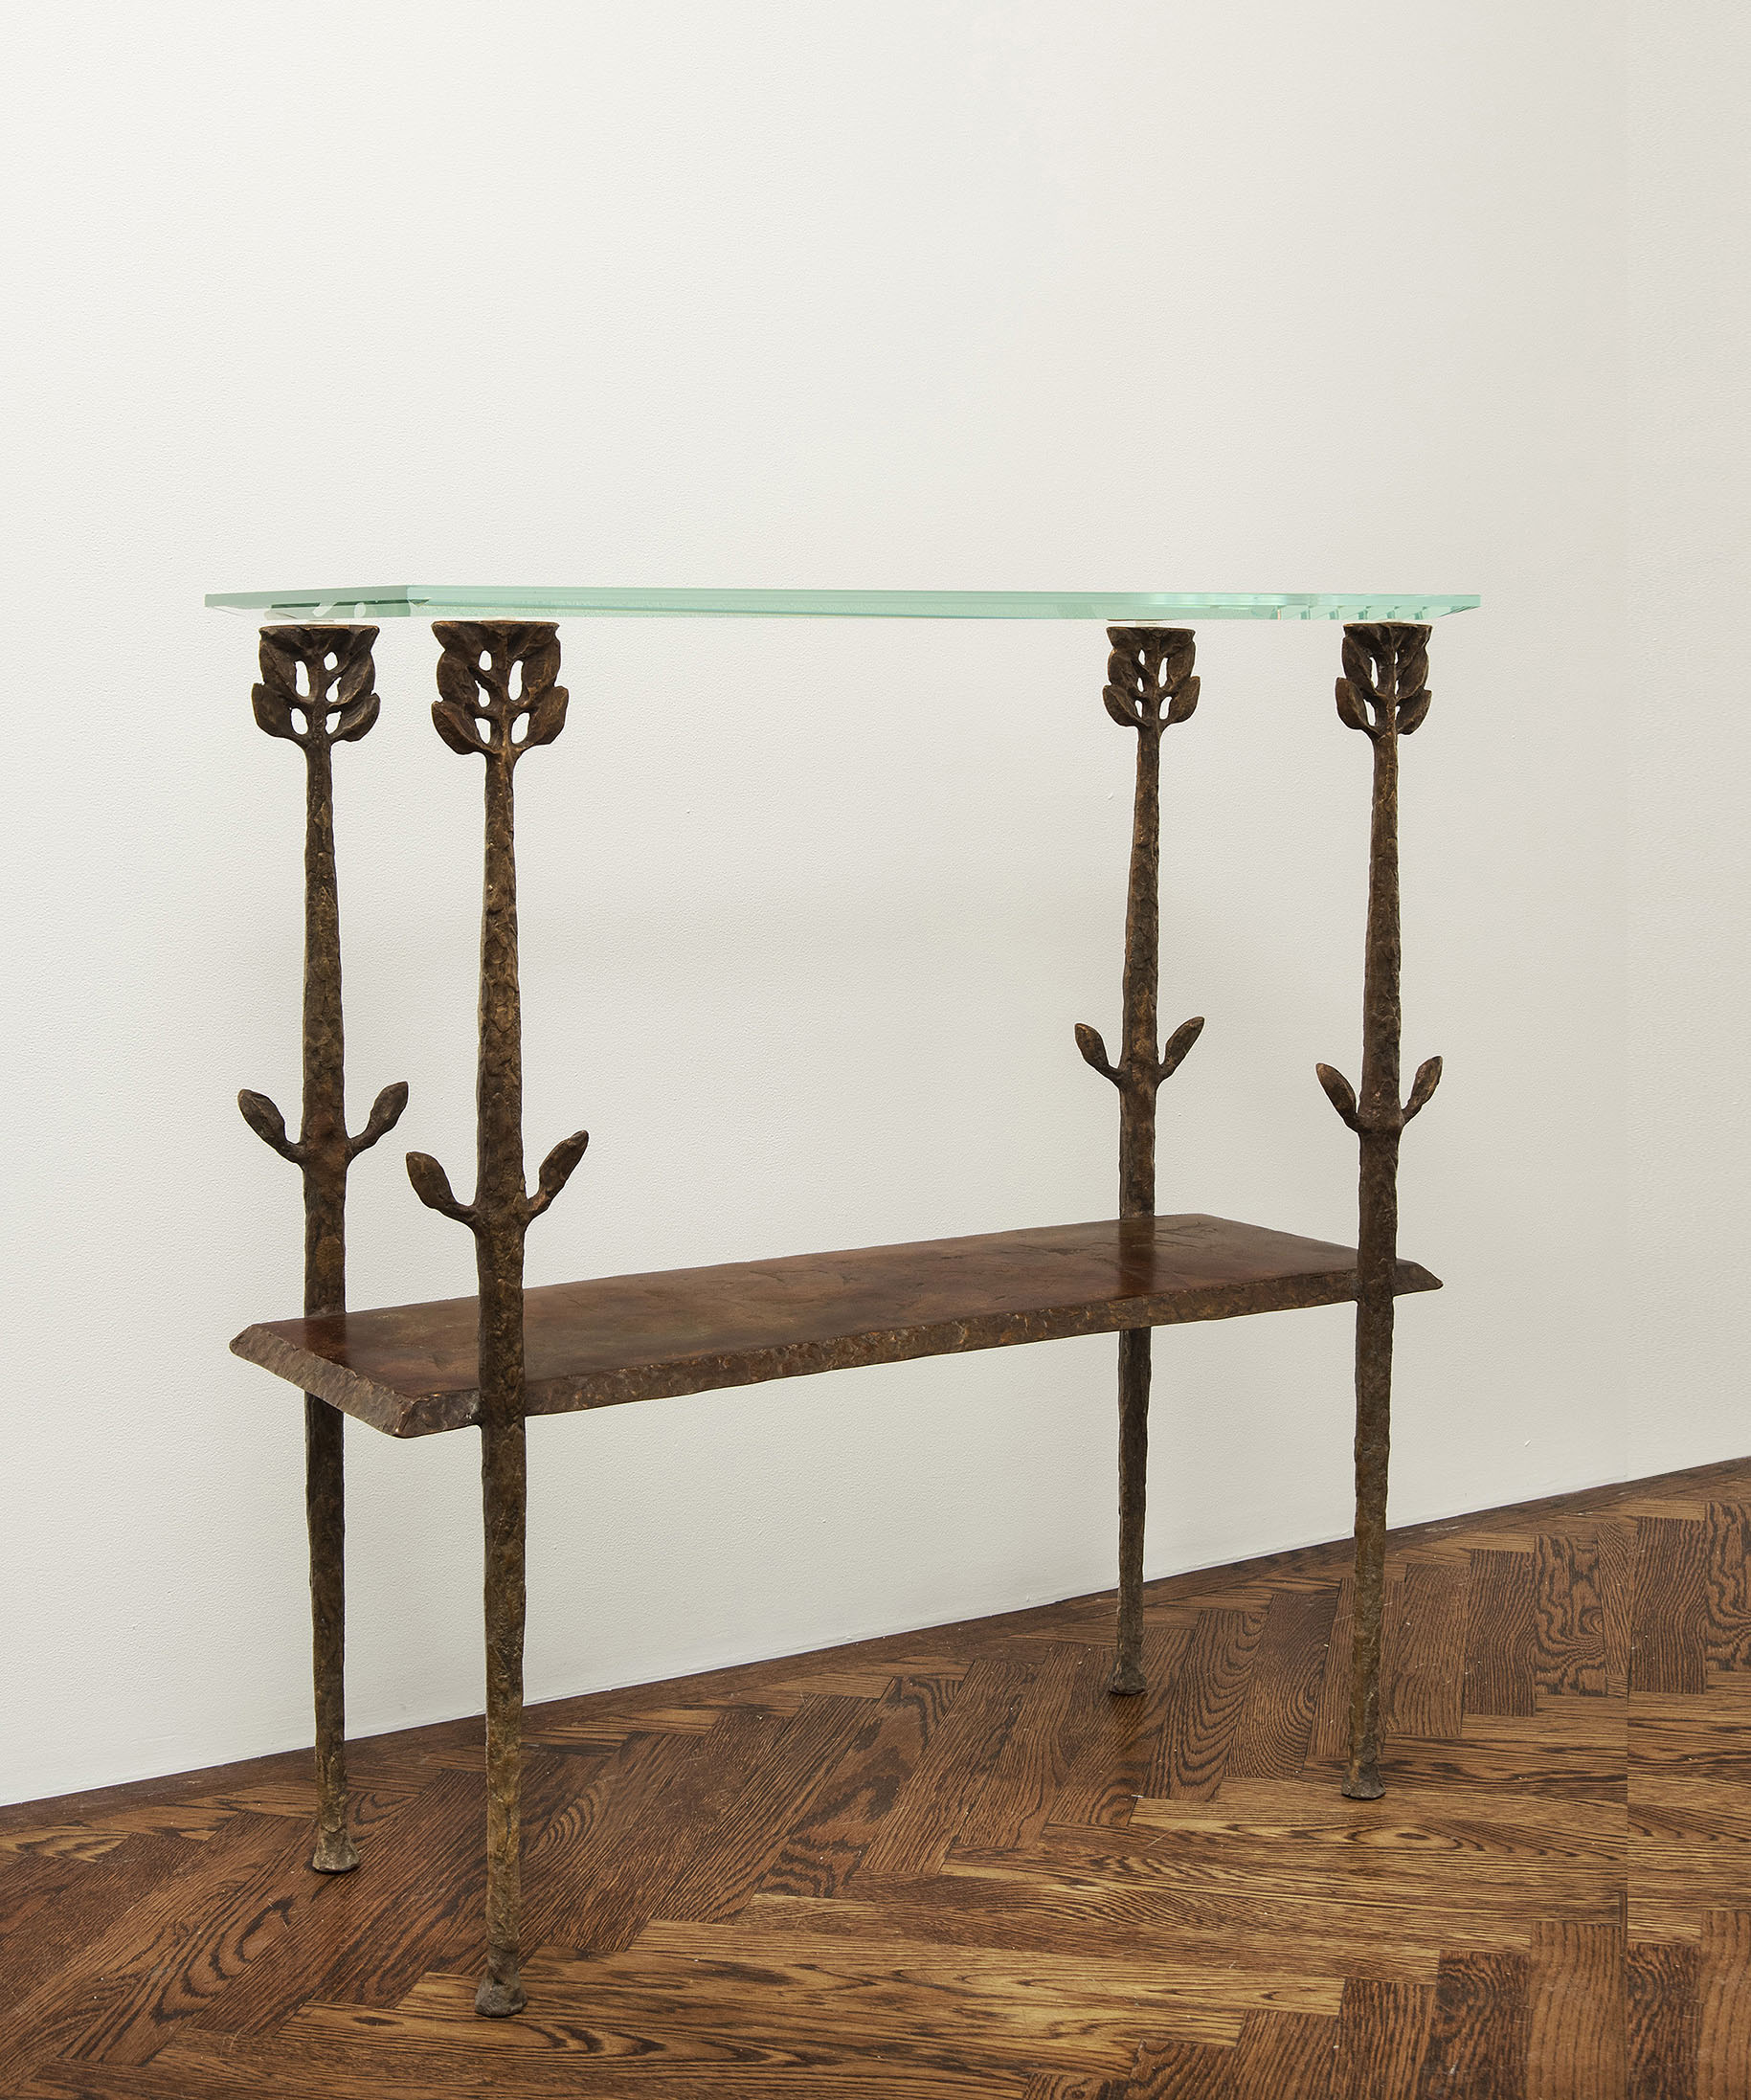 
							

									Giancarlo Biagi									Viale 2008									bronze console, clear glass top with bevel, 34 3/4 x 31 3/4 x 12 1/4 inches, shelf below 									


							